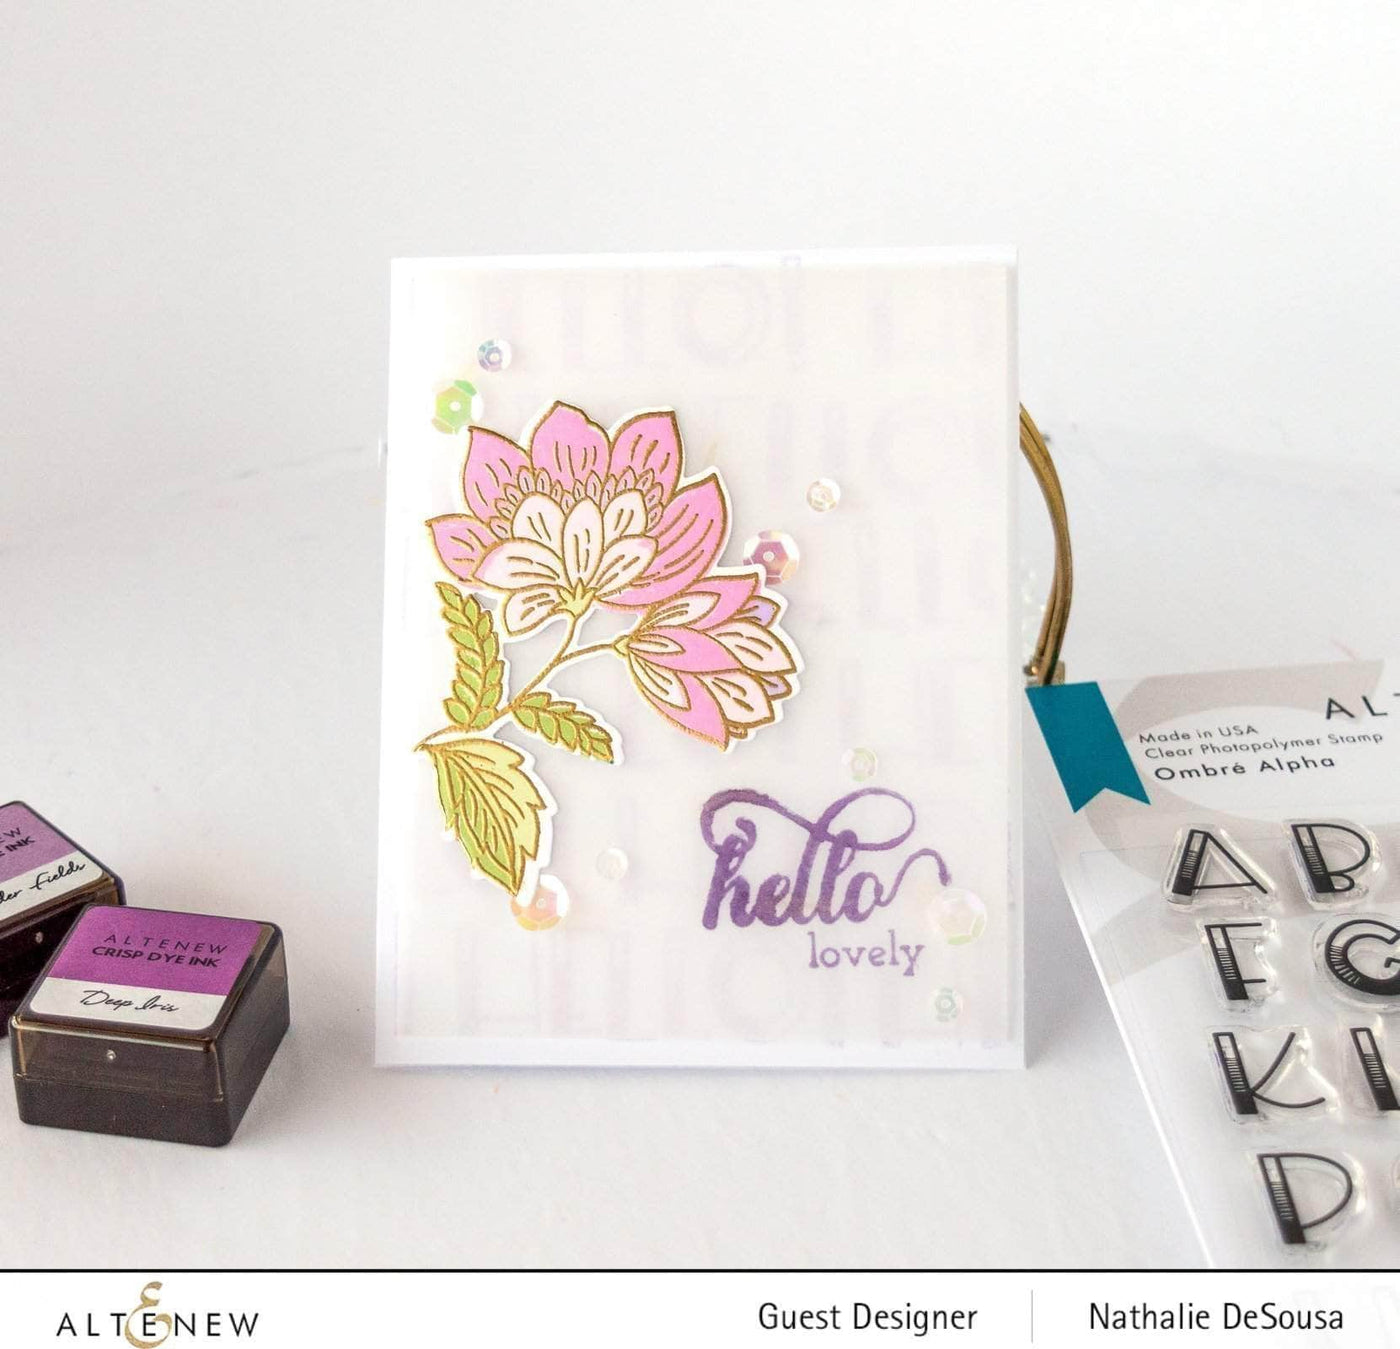 Photocentric Clear Stamps Fancy Greetings Stamp Set